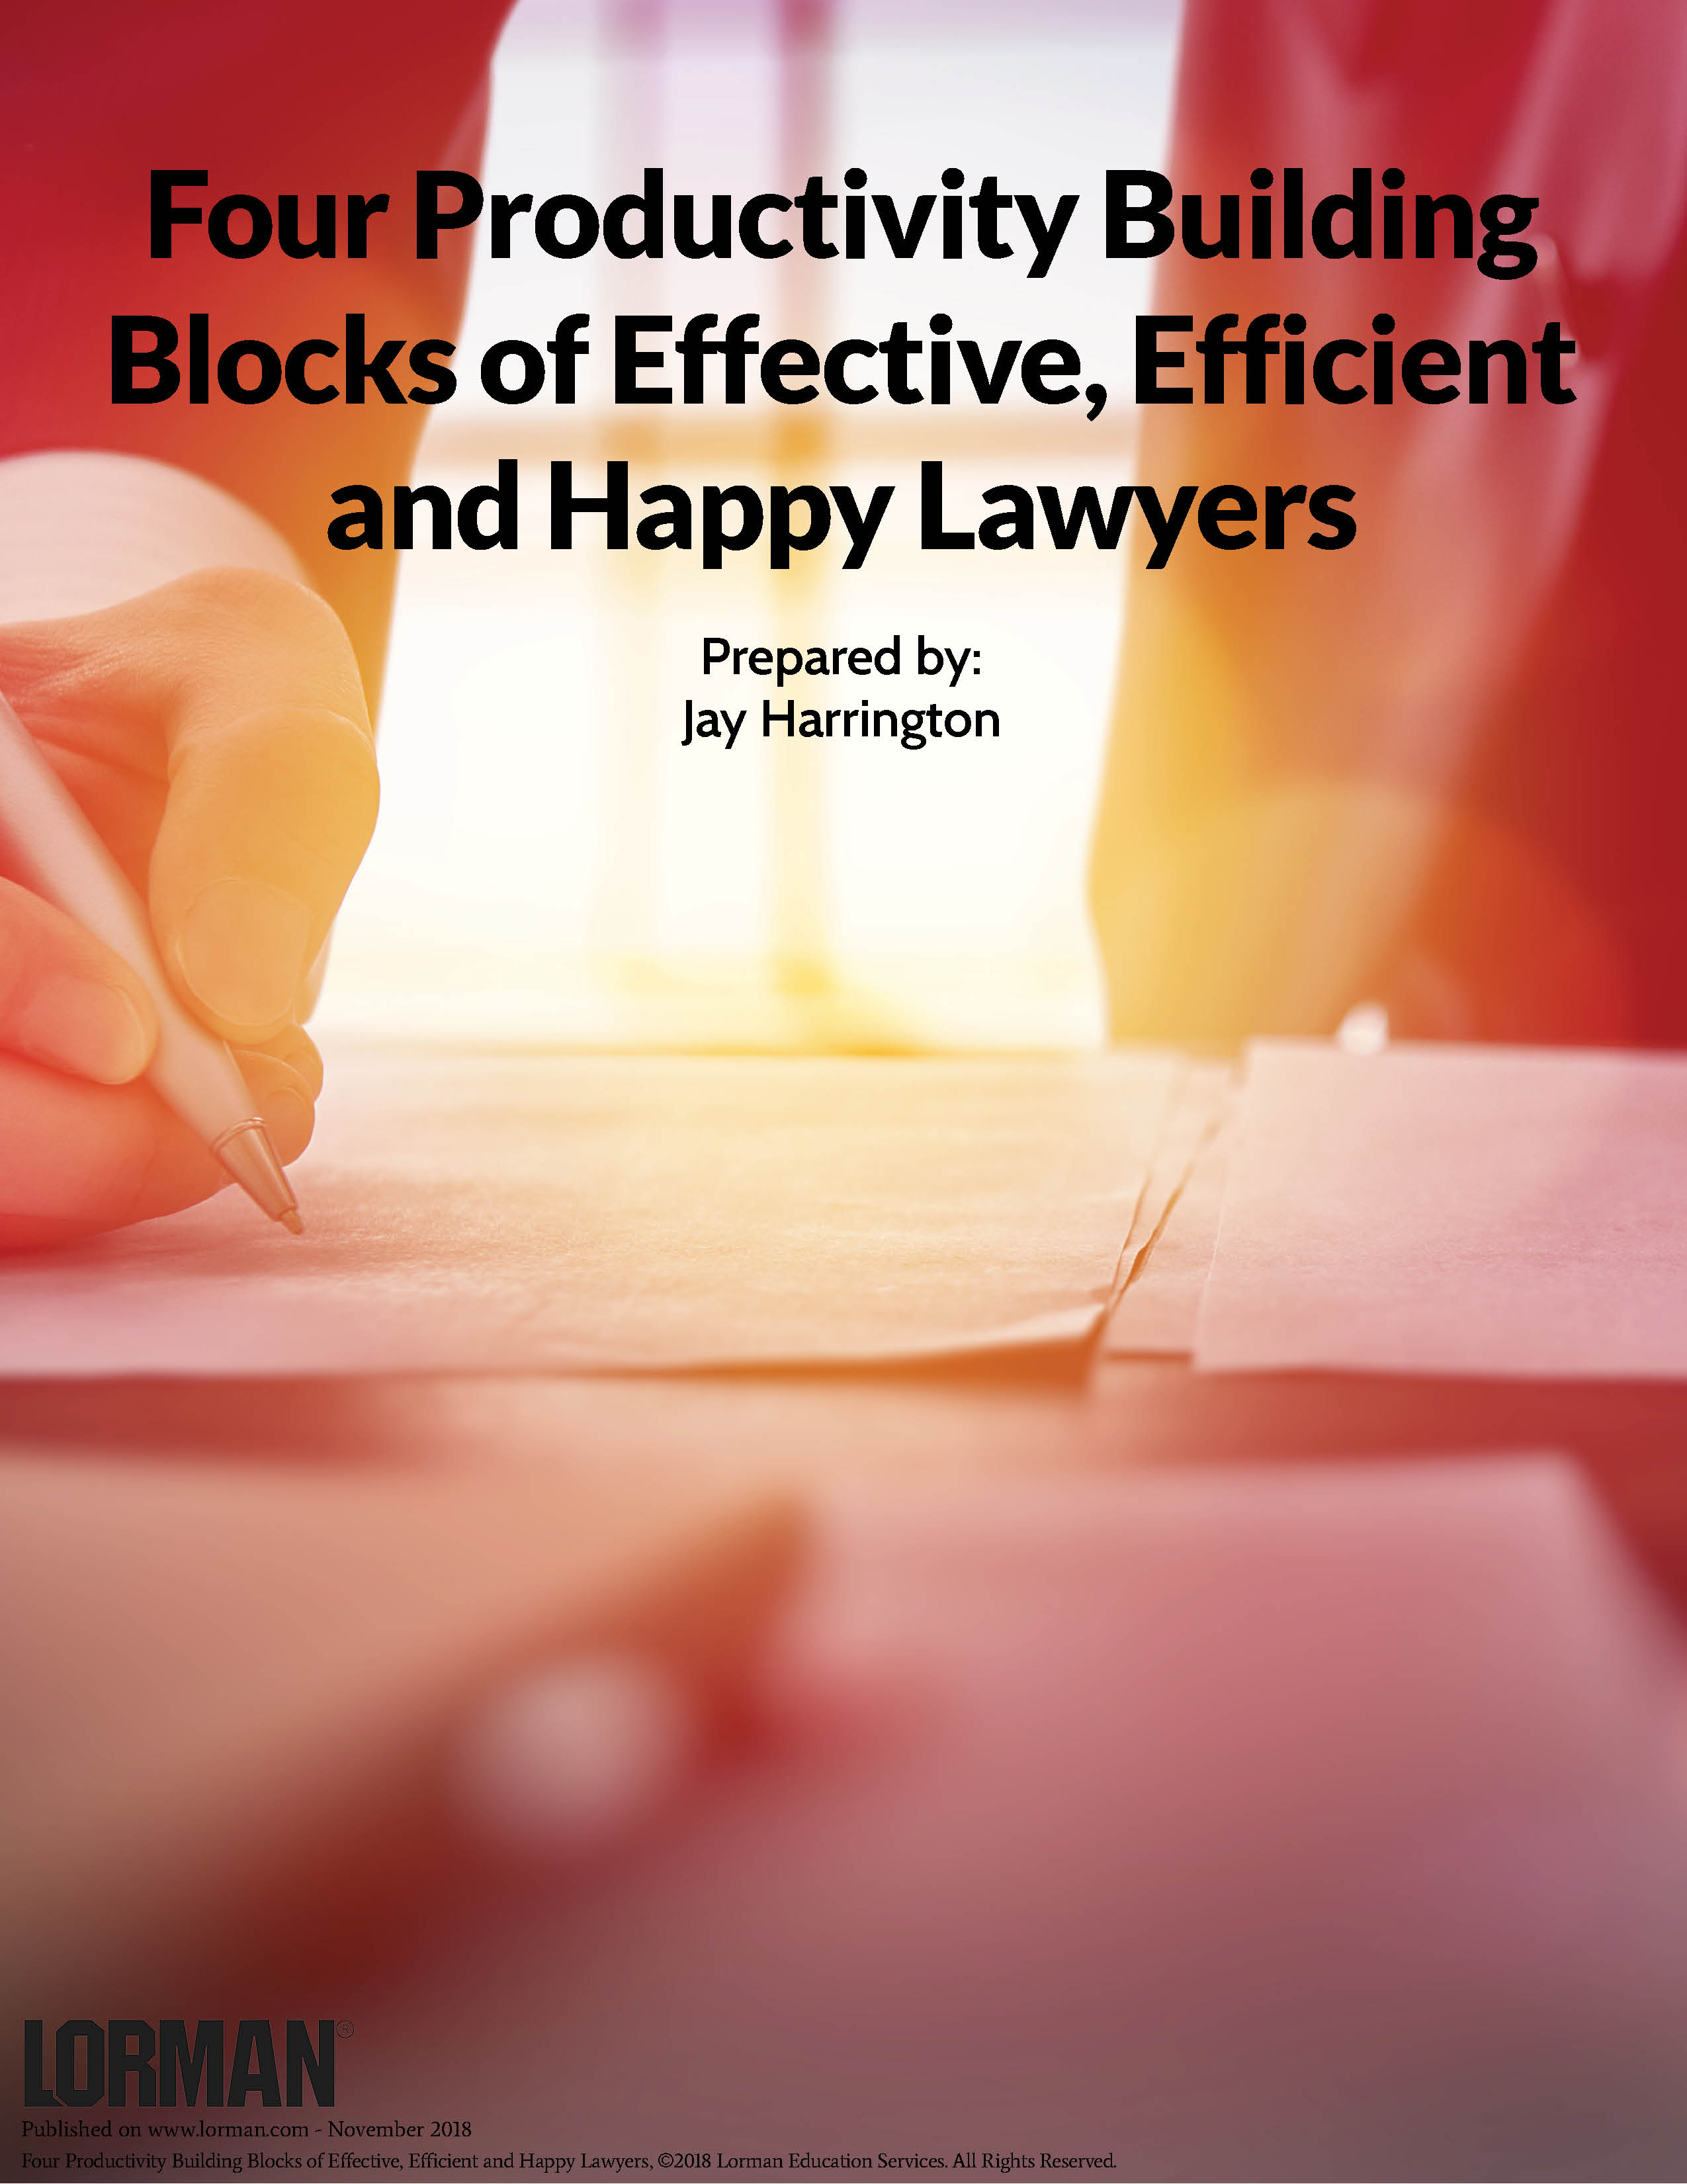 Four Productivity Building Blocks of Effective, Efficient and Happy Lawyers